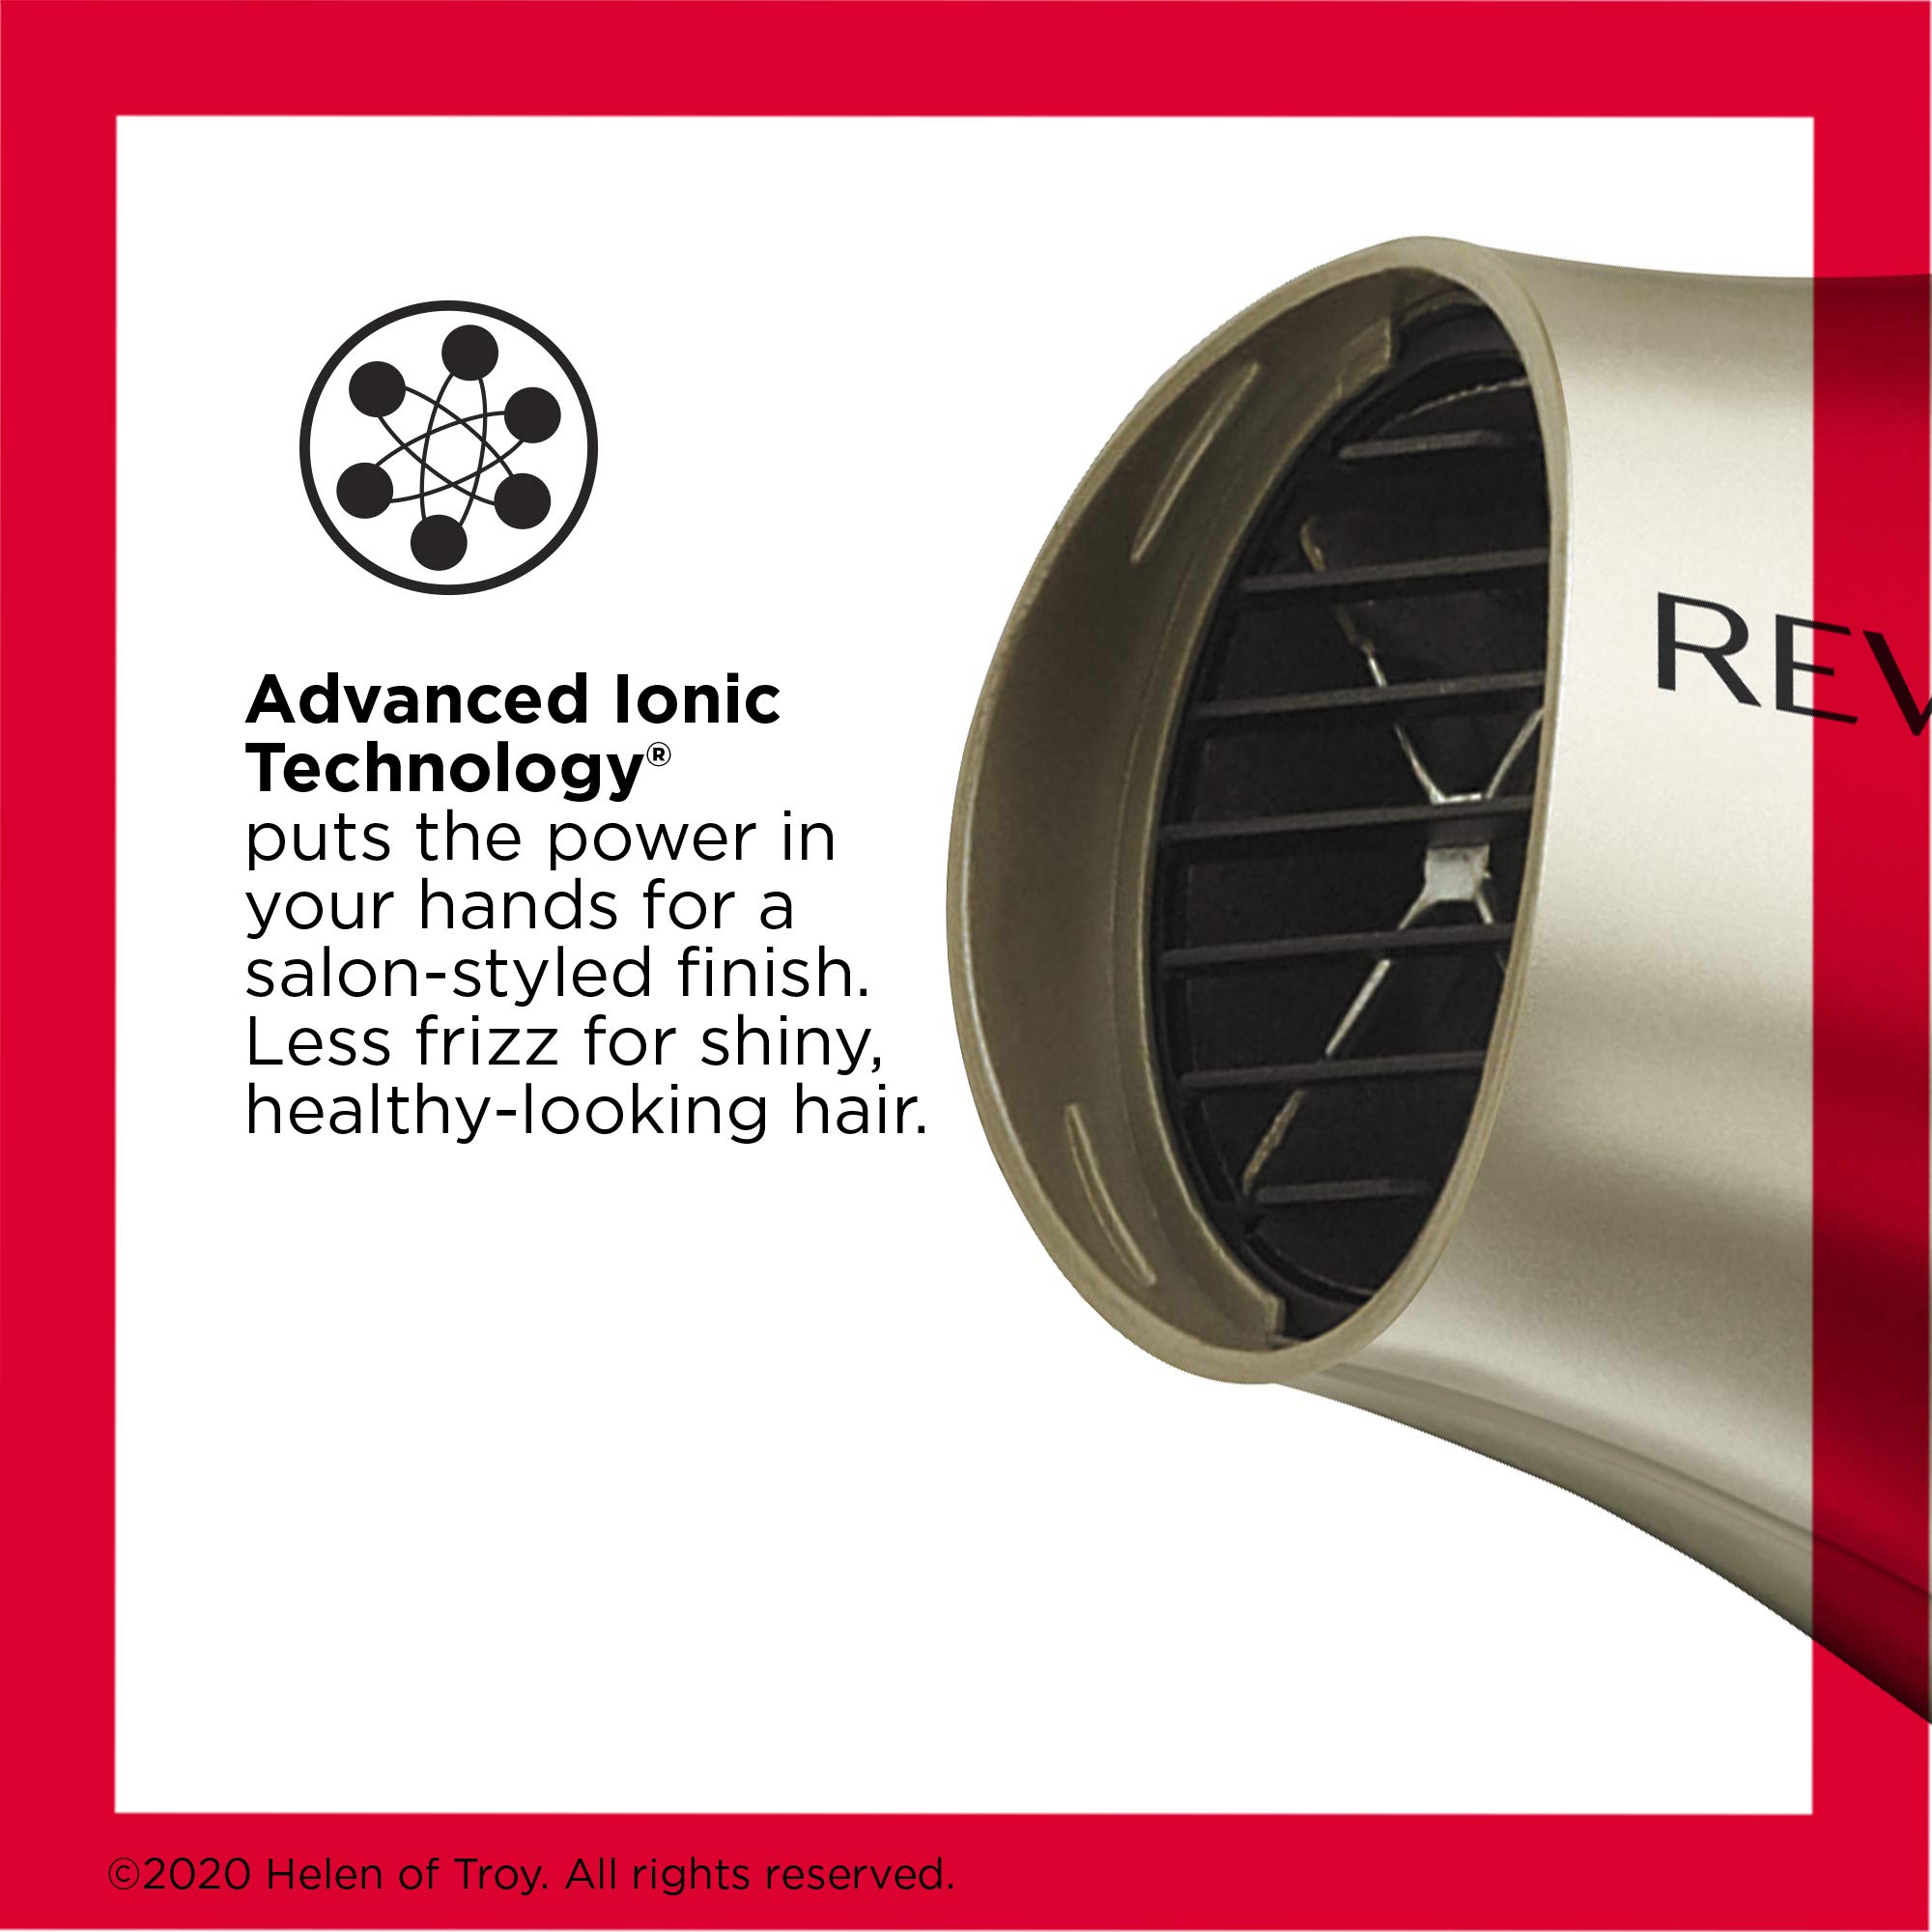 REVLON 1875W Compact Folding Handle Hair Dryer | Great for Travel